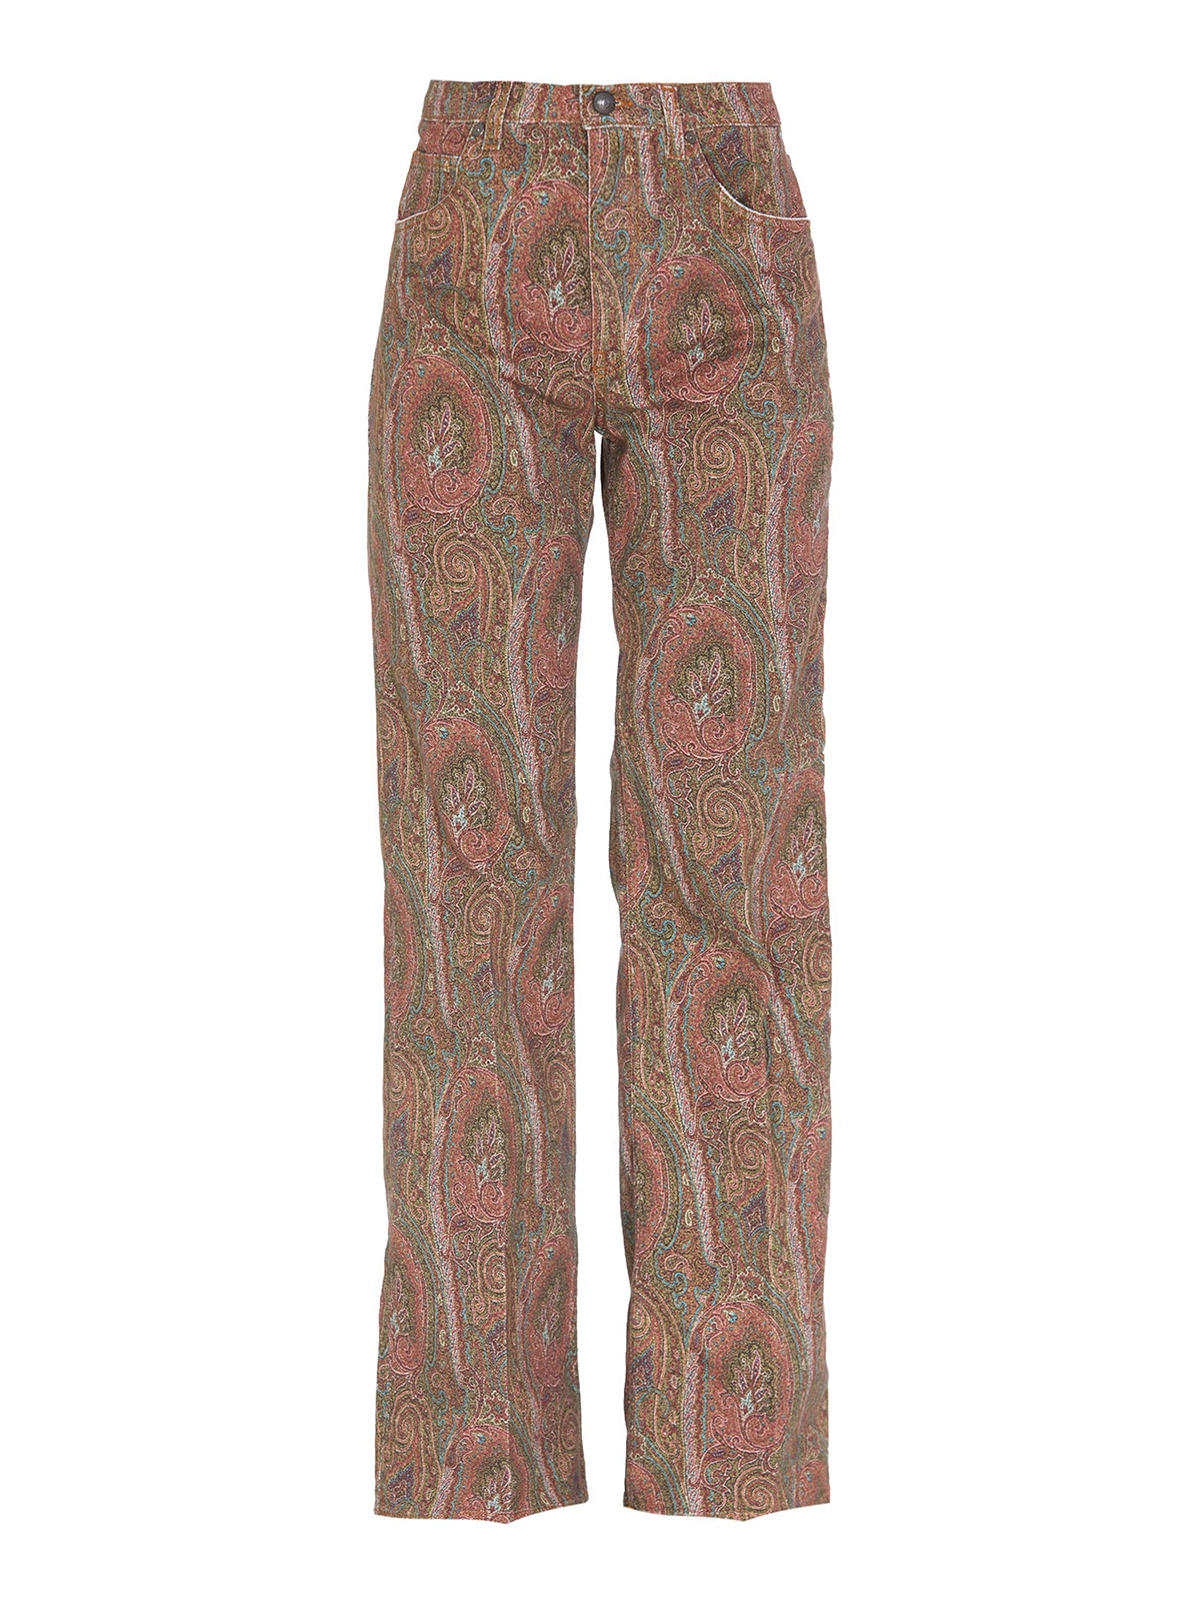 patterned jeans